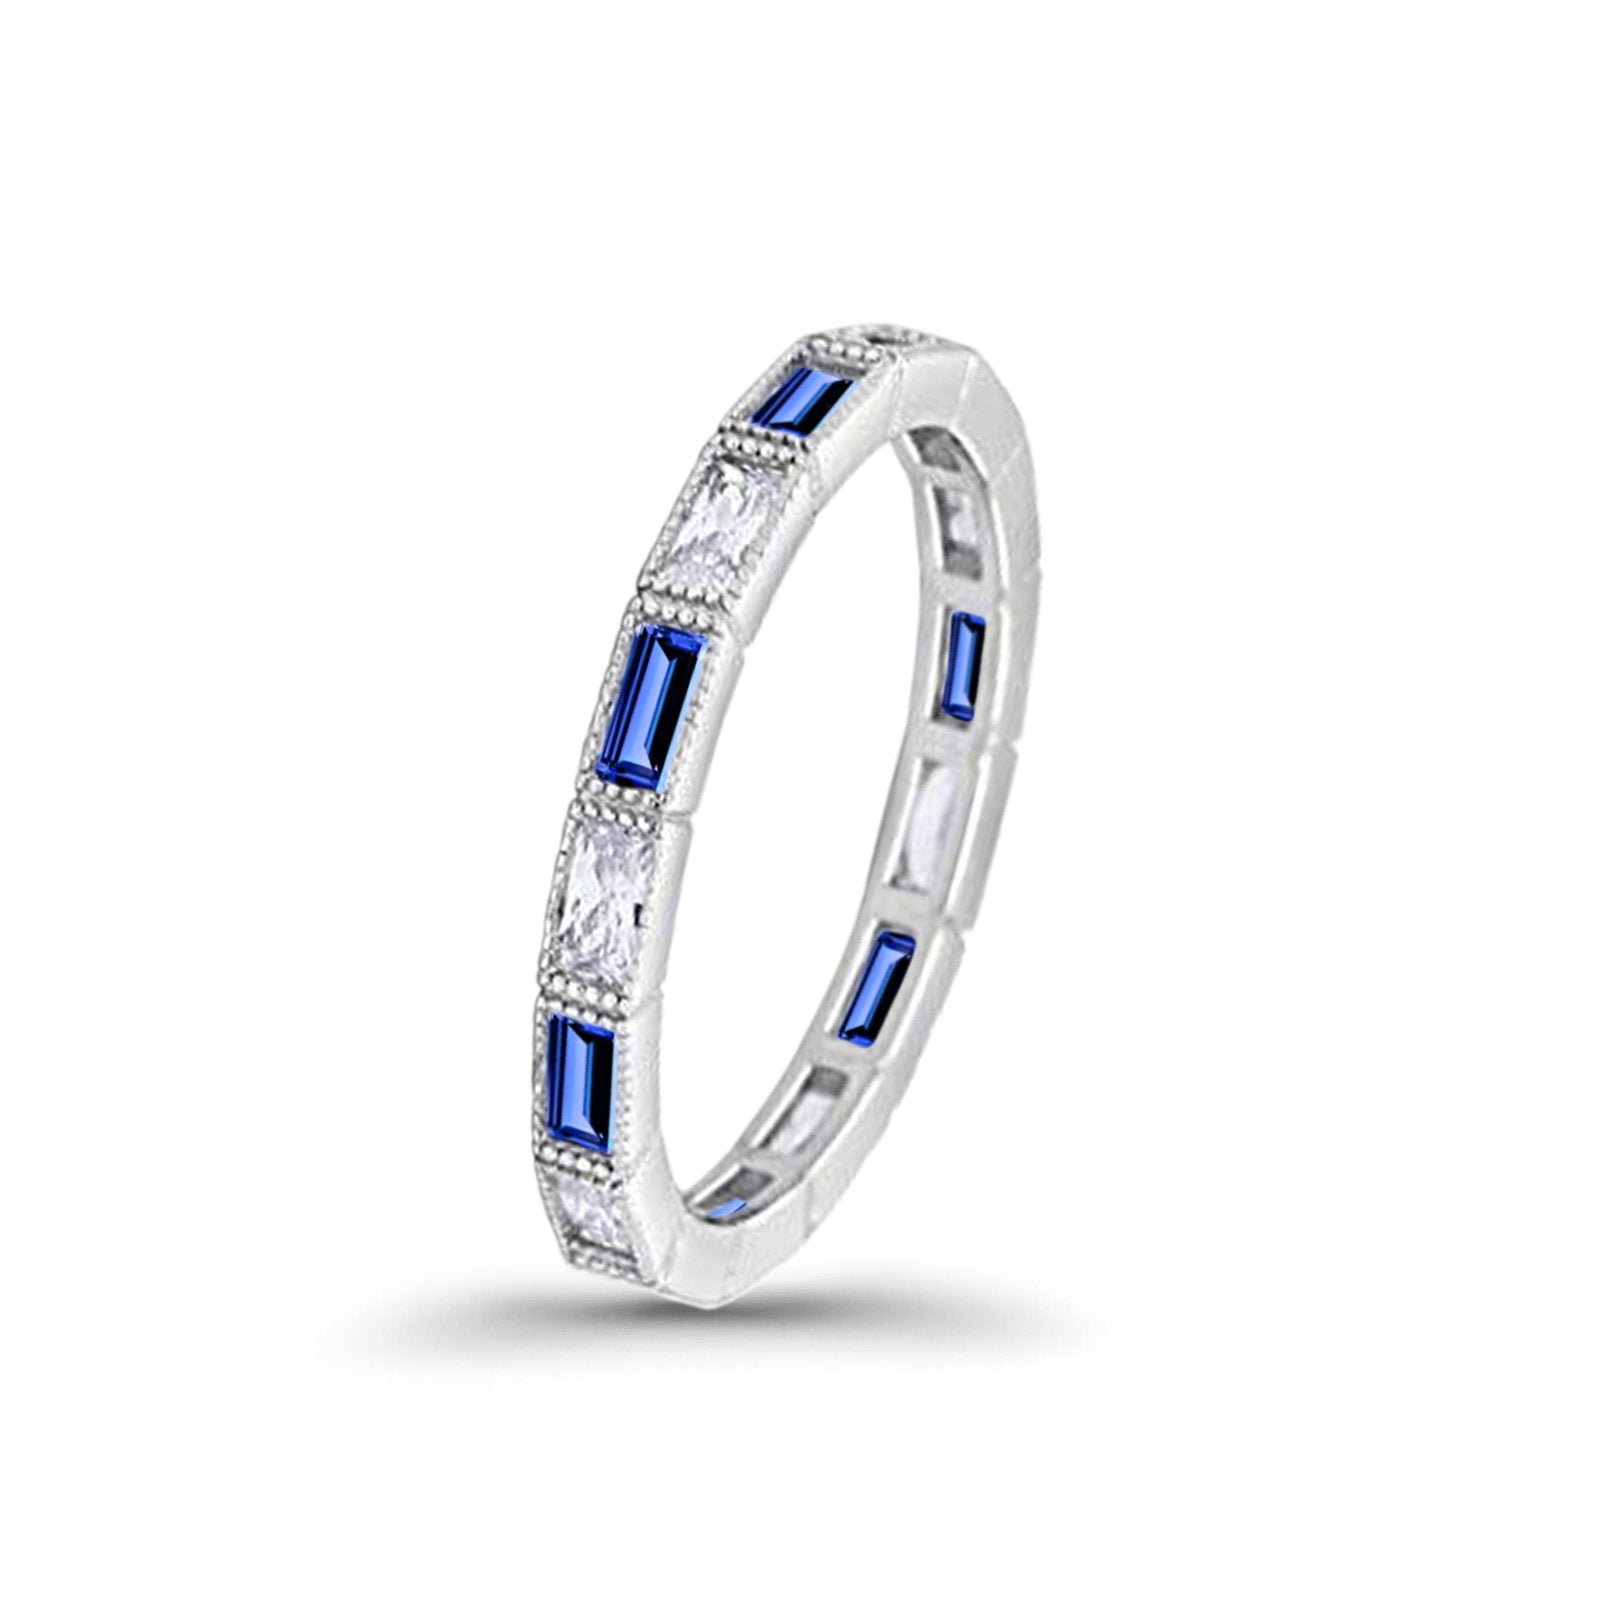 Art Deco Baguette Full Eternity Wedding Band Ring Simulated CZ 925 Sterling Silver